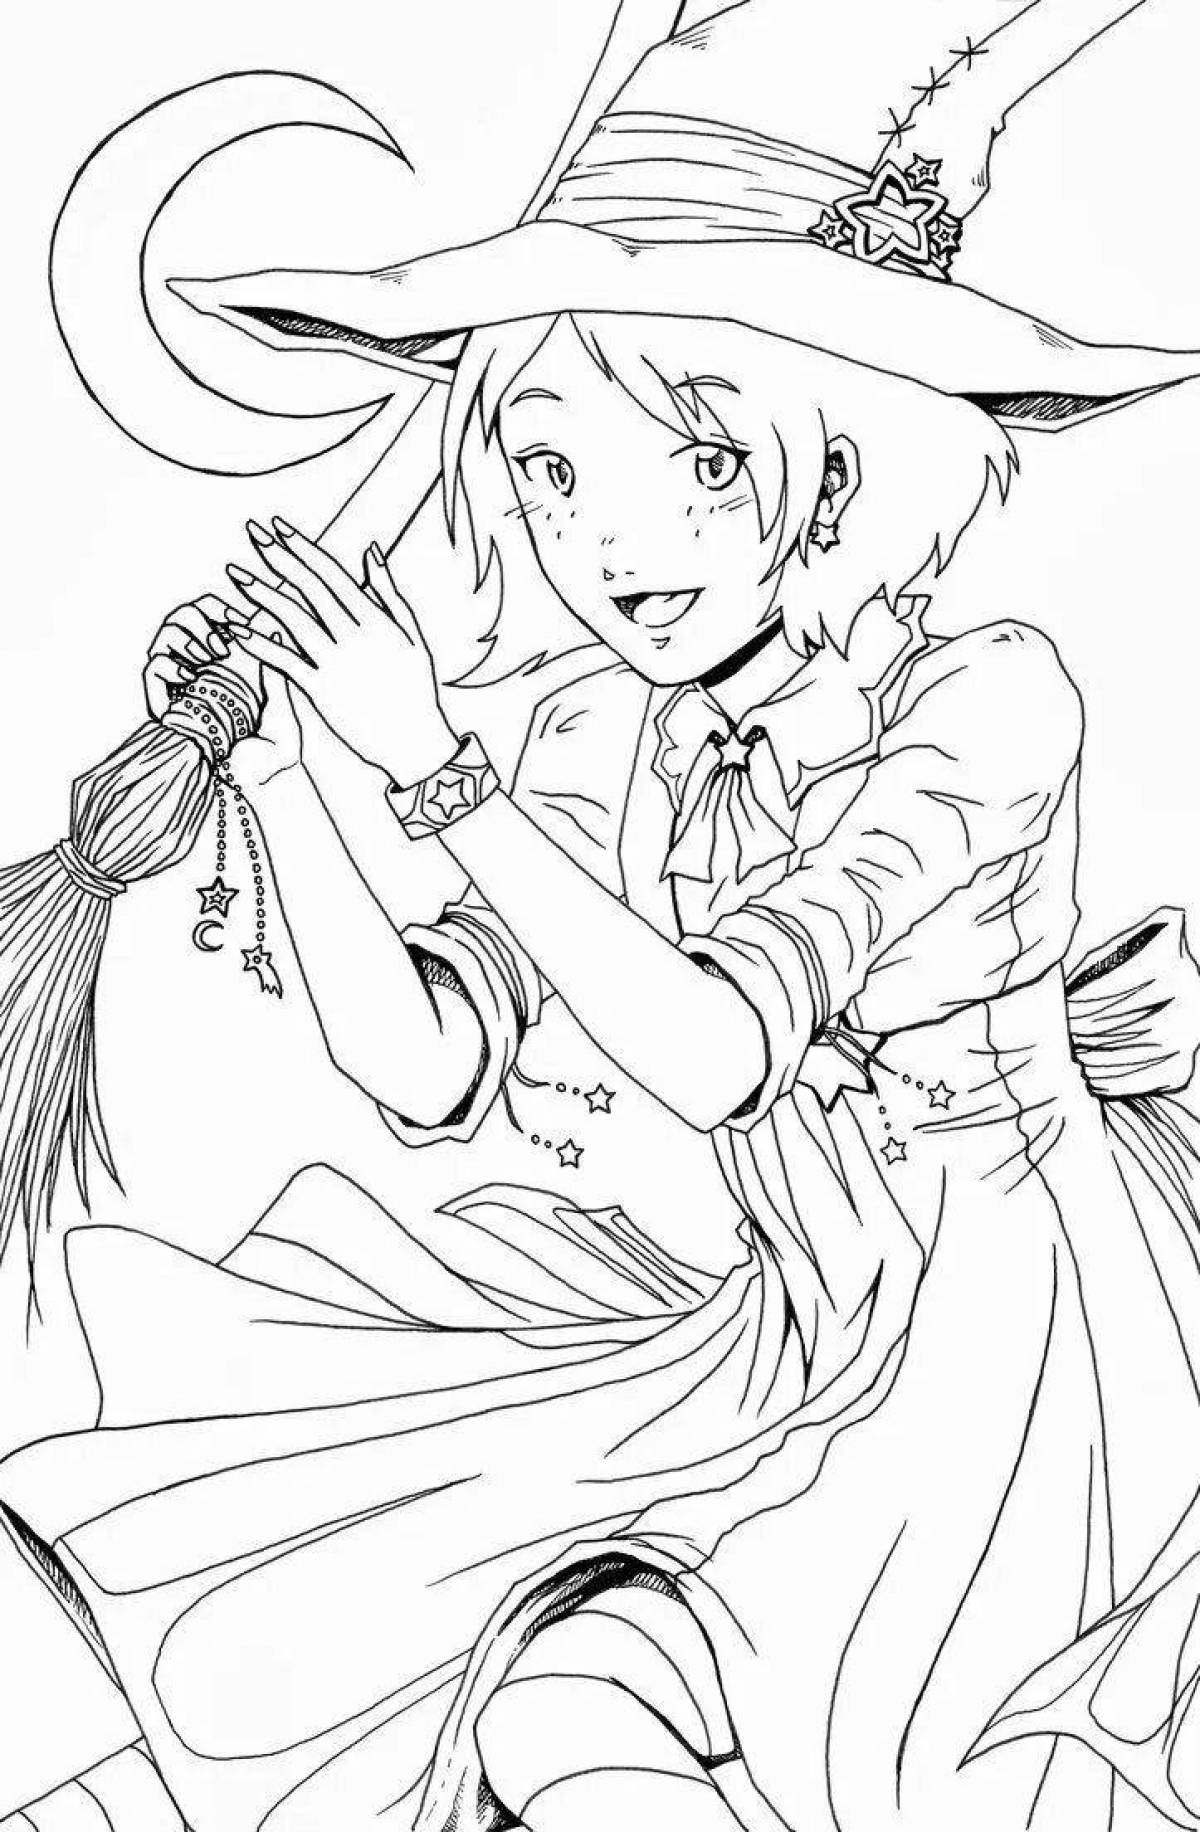 Bewitching anime witch coloring book